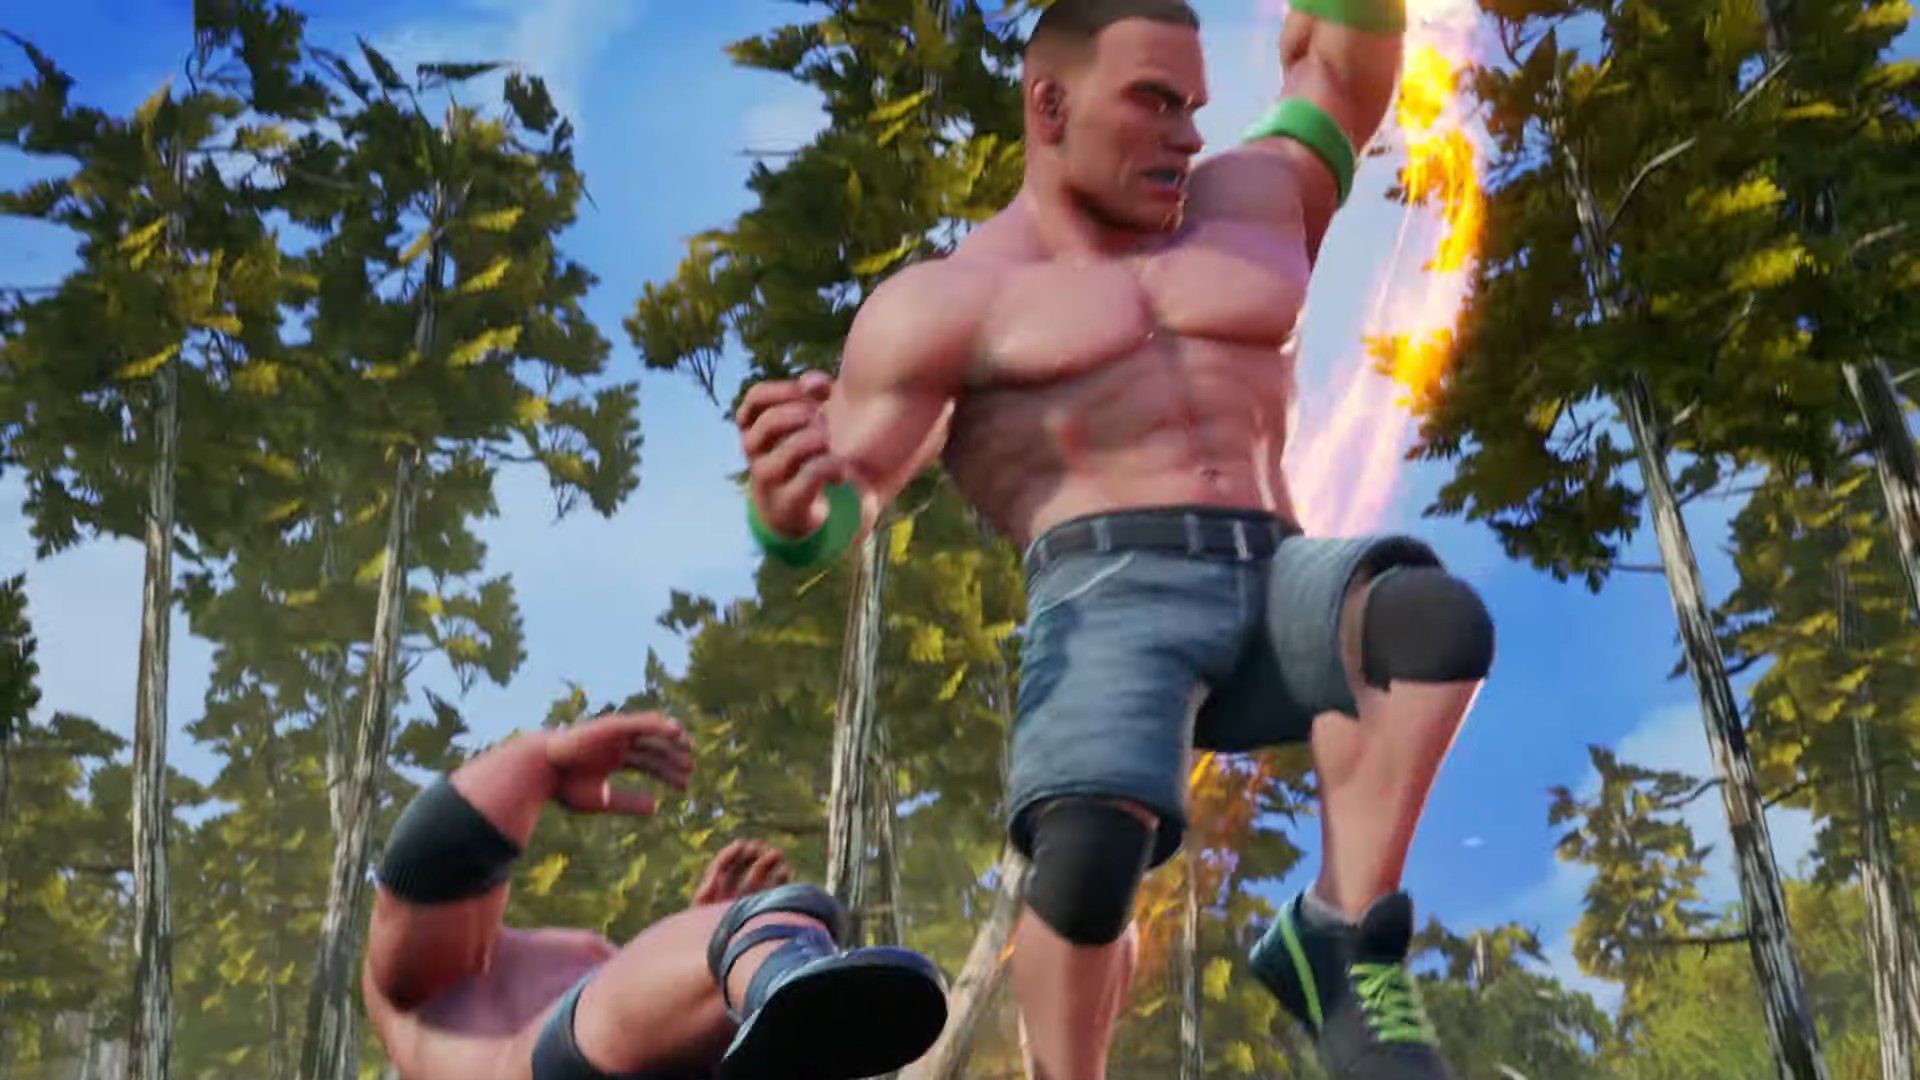 WWE 2K Battlegrounds enters the ring with arcade wrestling action